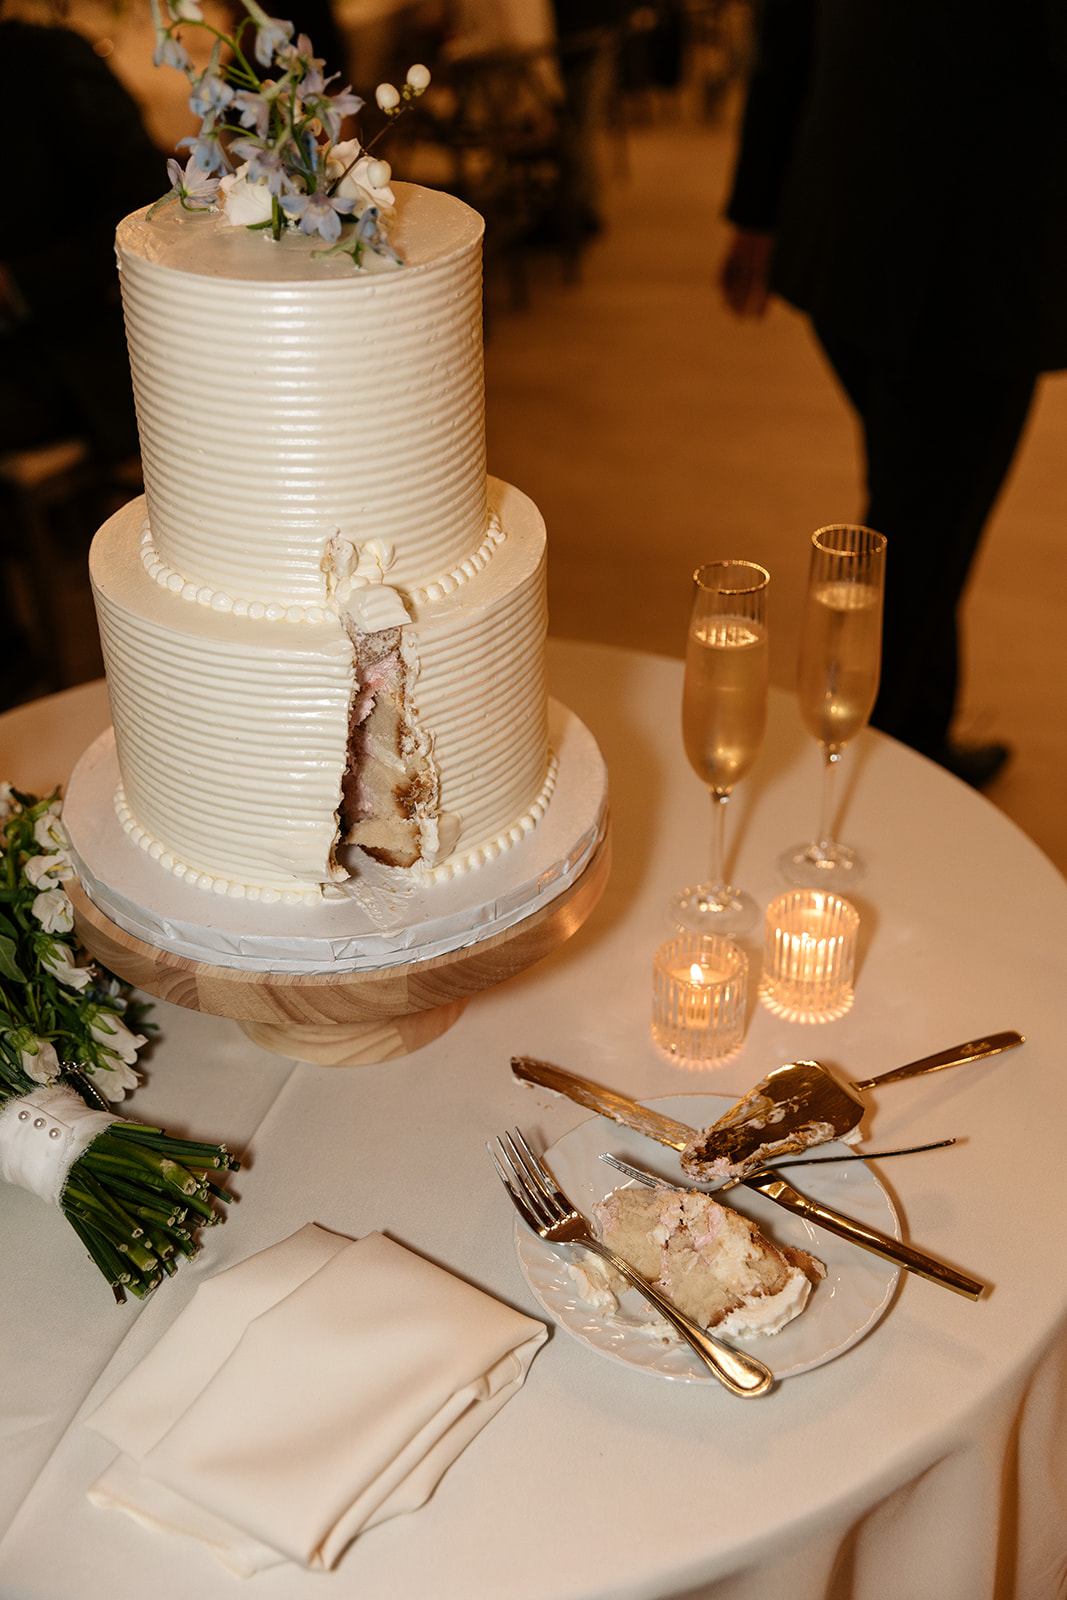 grand gimeno wedding orange county california bride and groom cake cutting pictures two tiered wedding cake flower cake